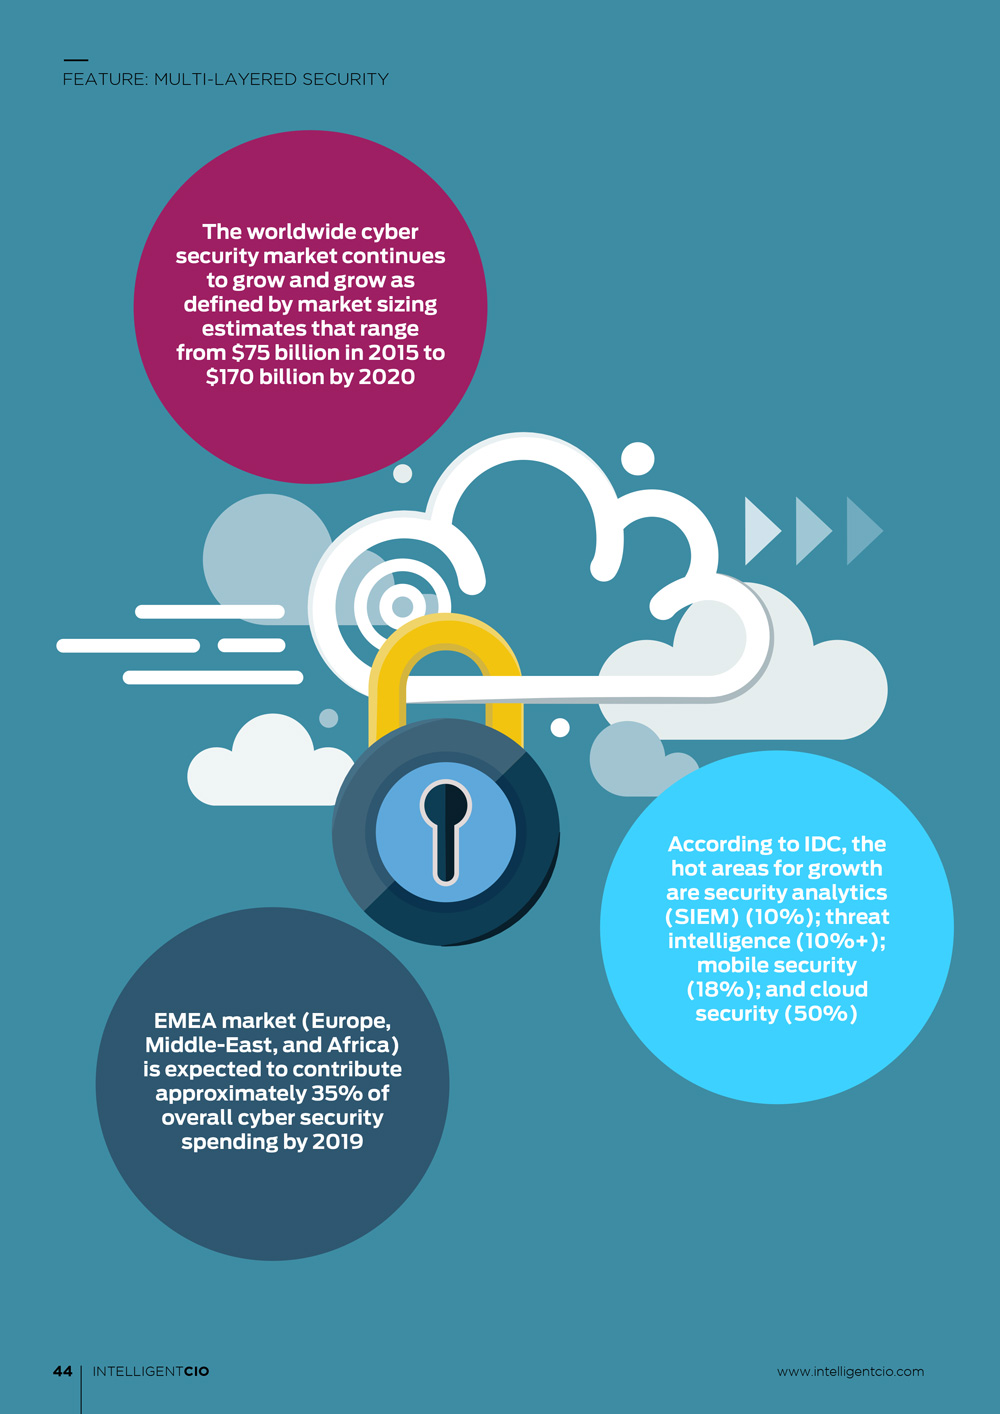 Infographic: Multi-layered Security